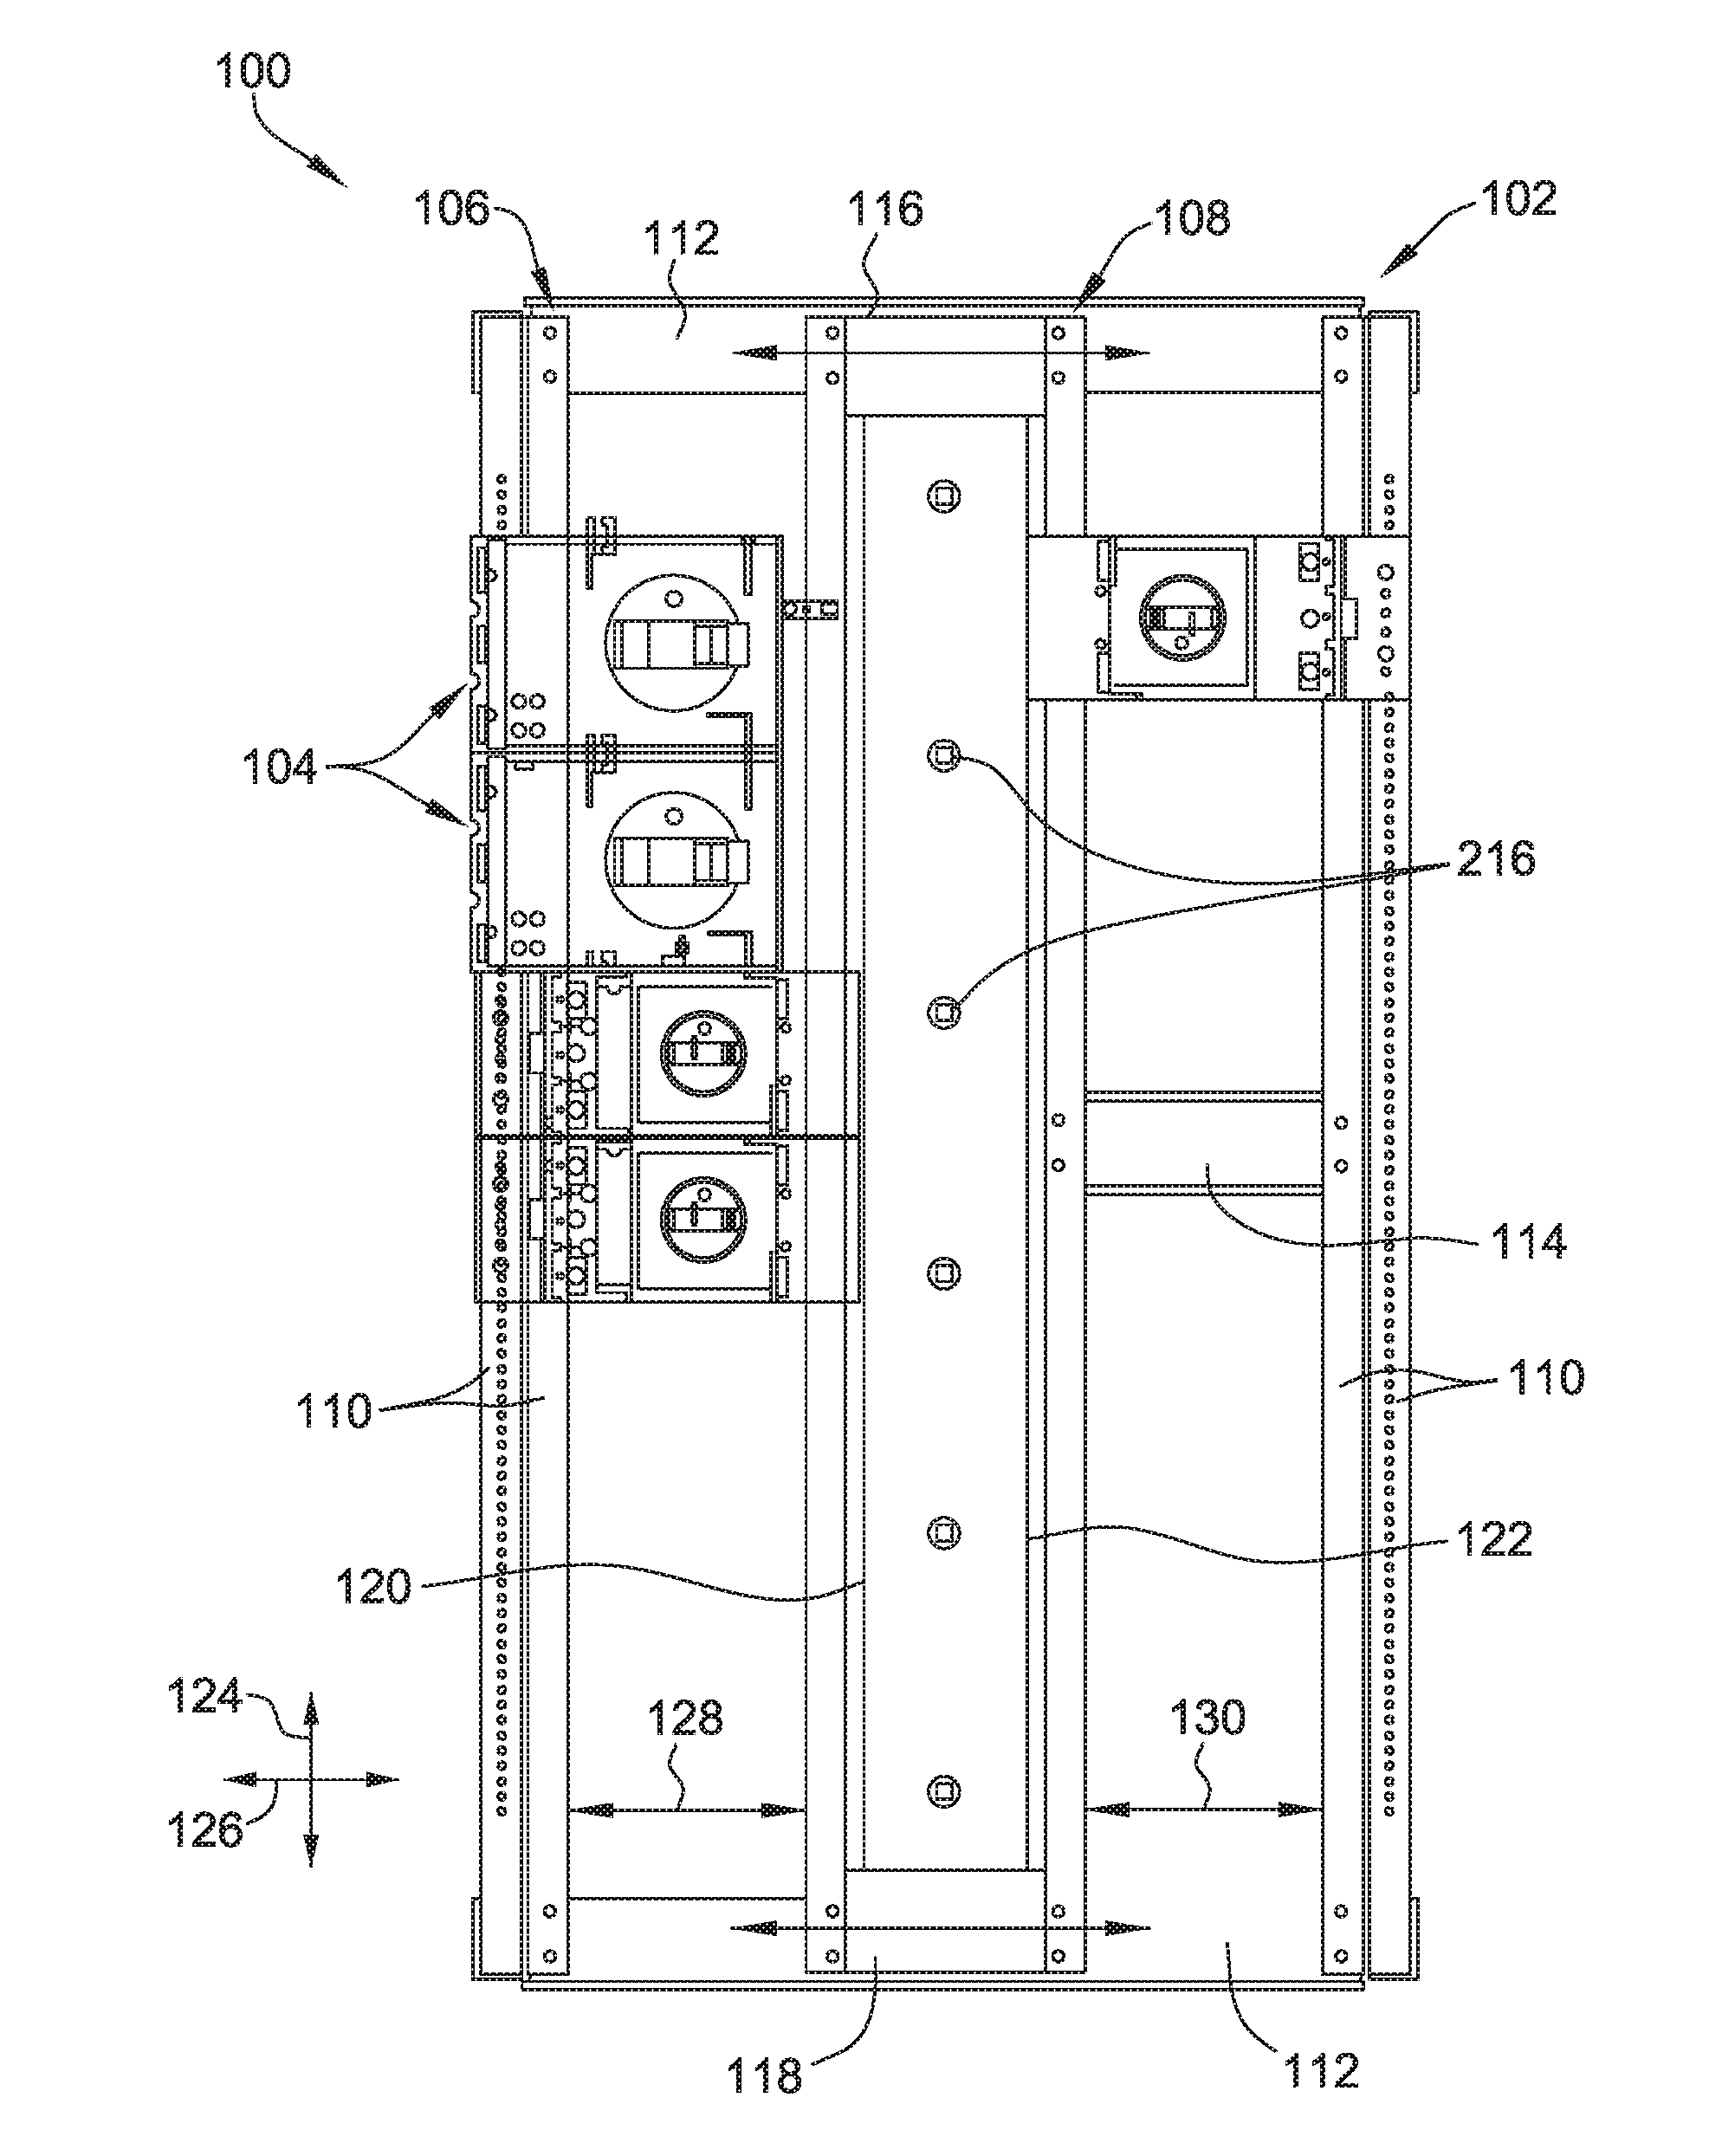 Electrical device, electrical distribution system, and methods of assembling same